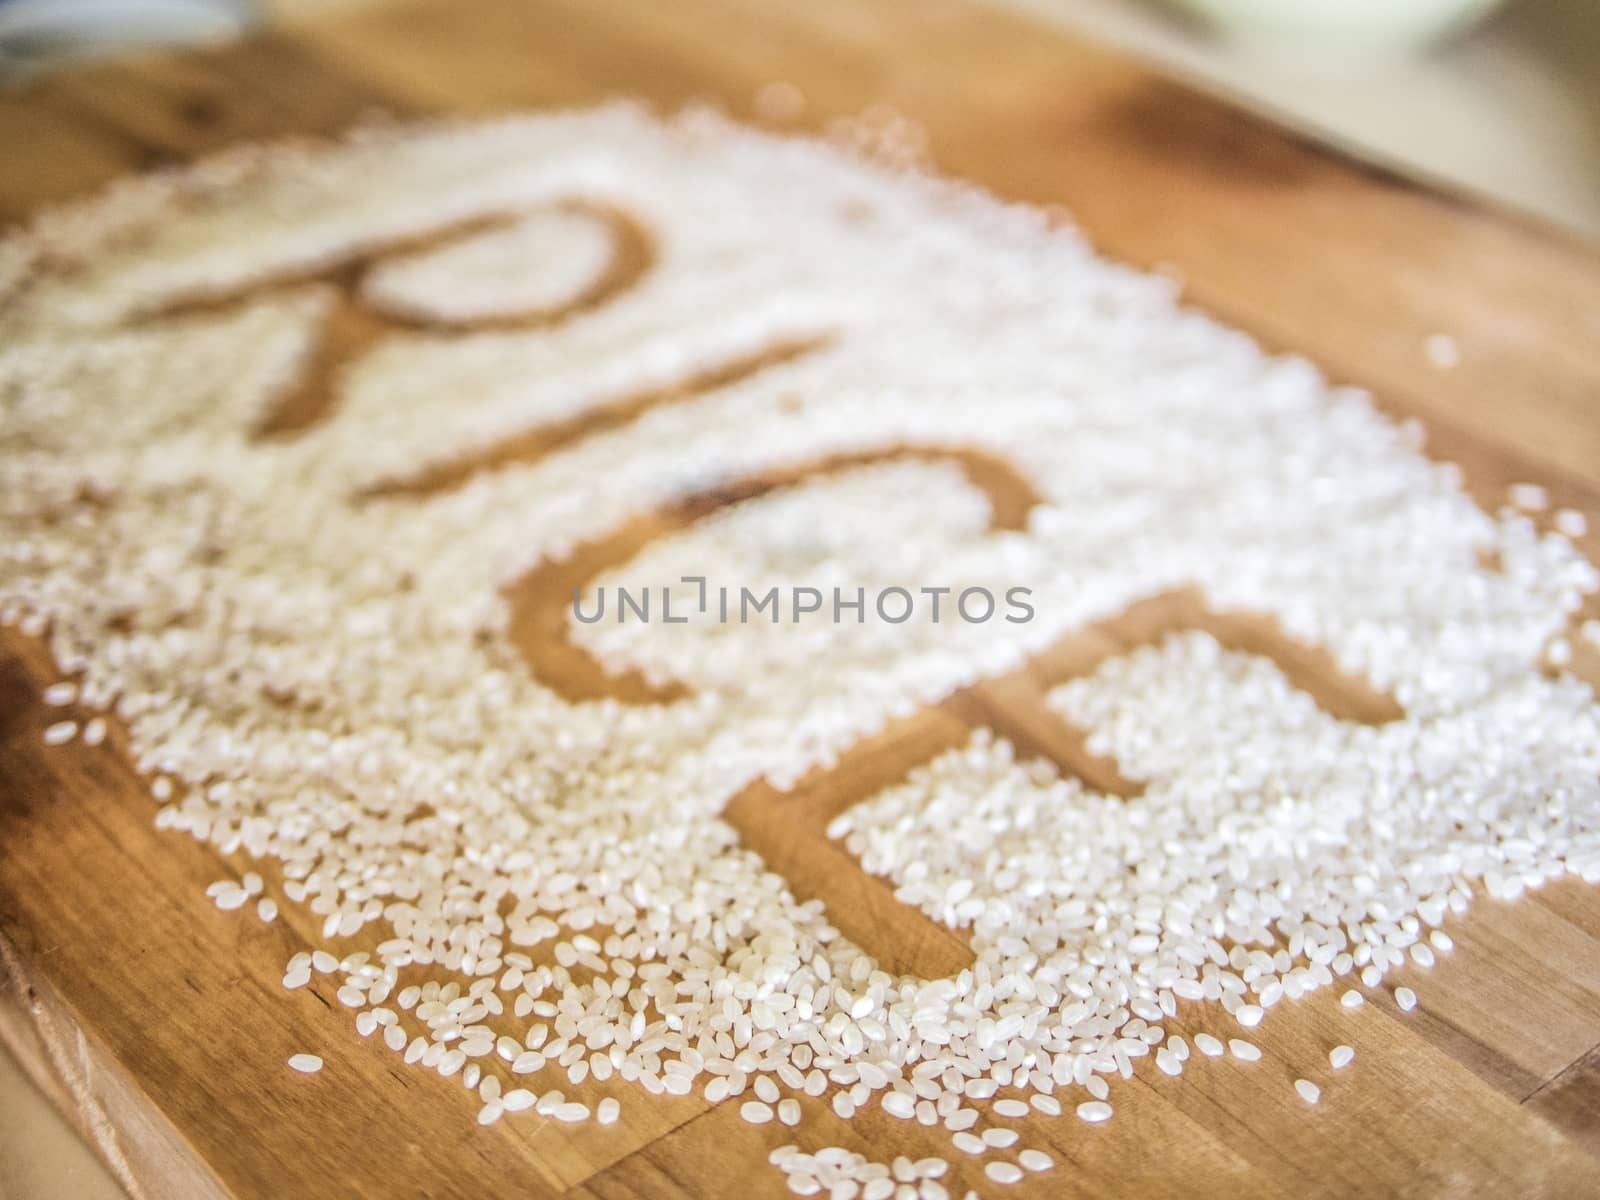 Rice word made of rice on wooden board